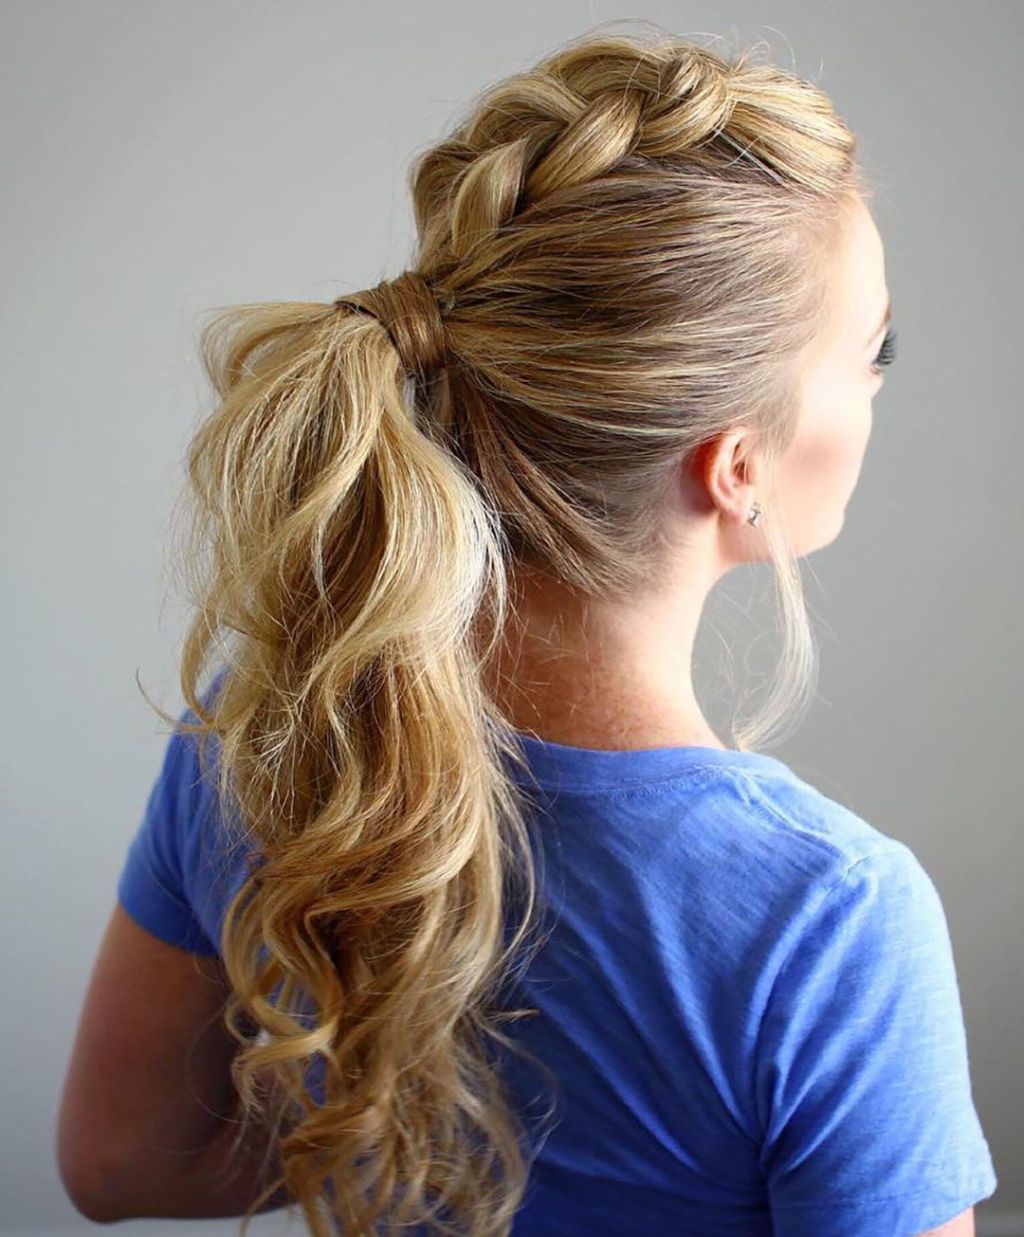 18 Ponytail Hairstyles From Simple to Bold